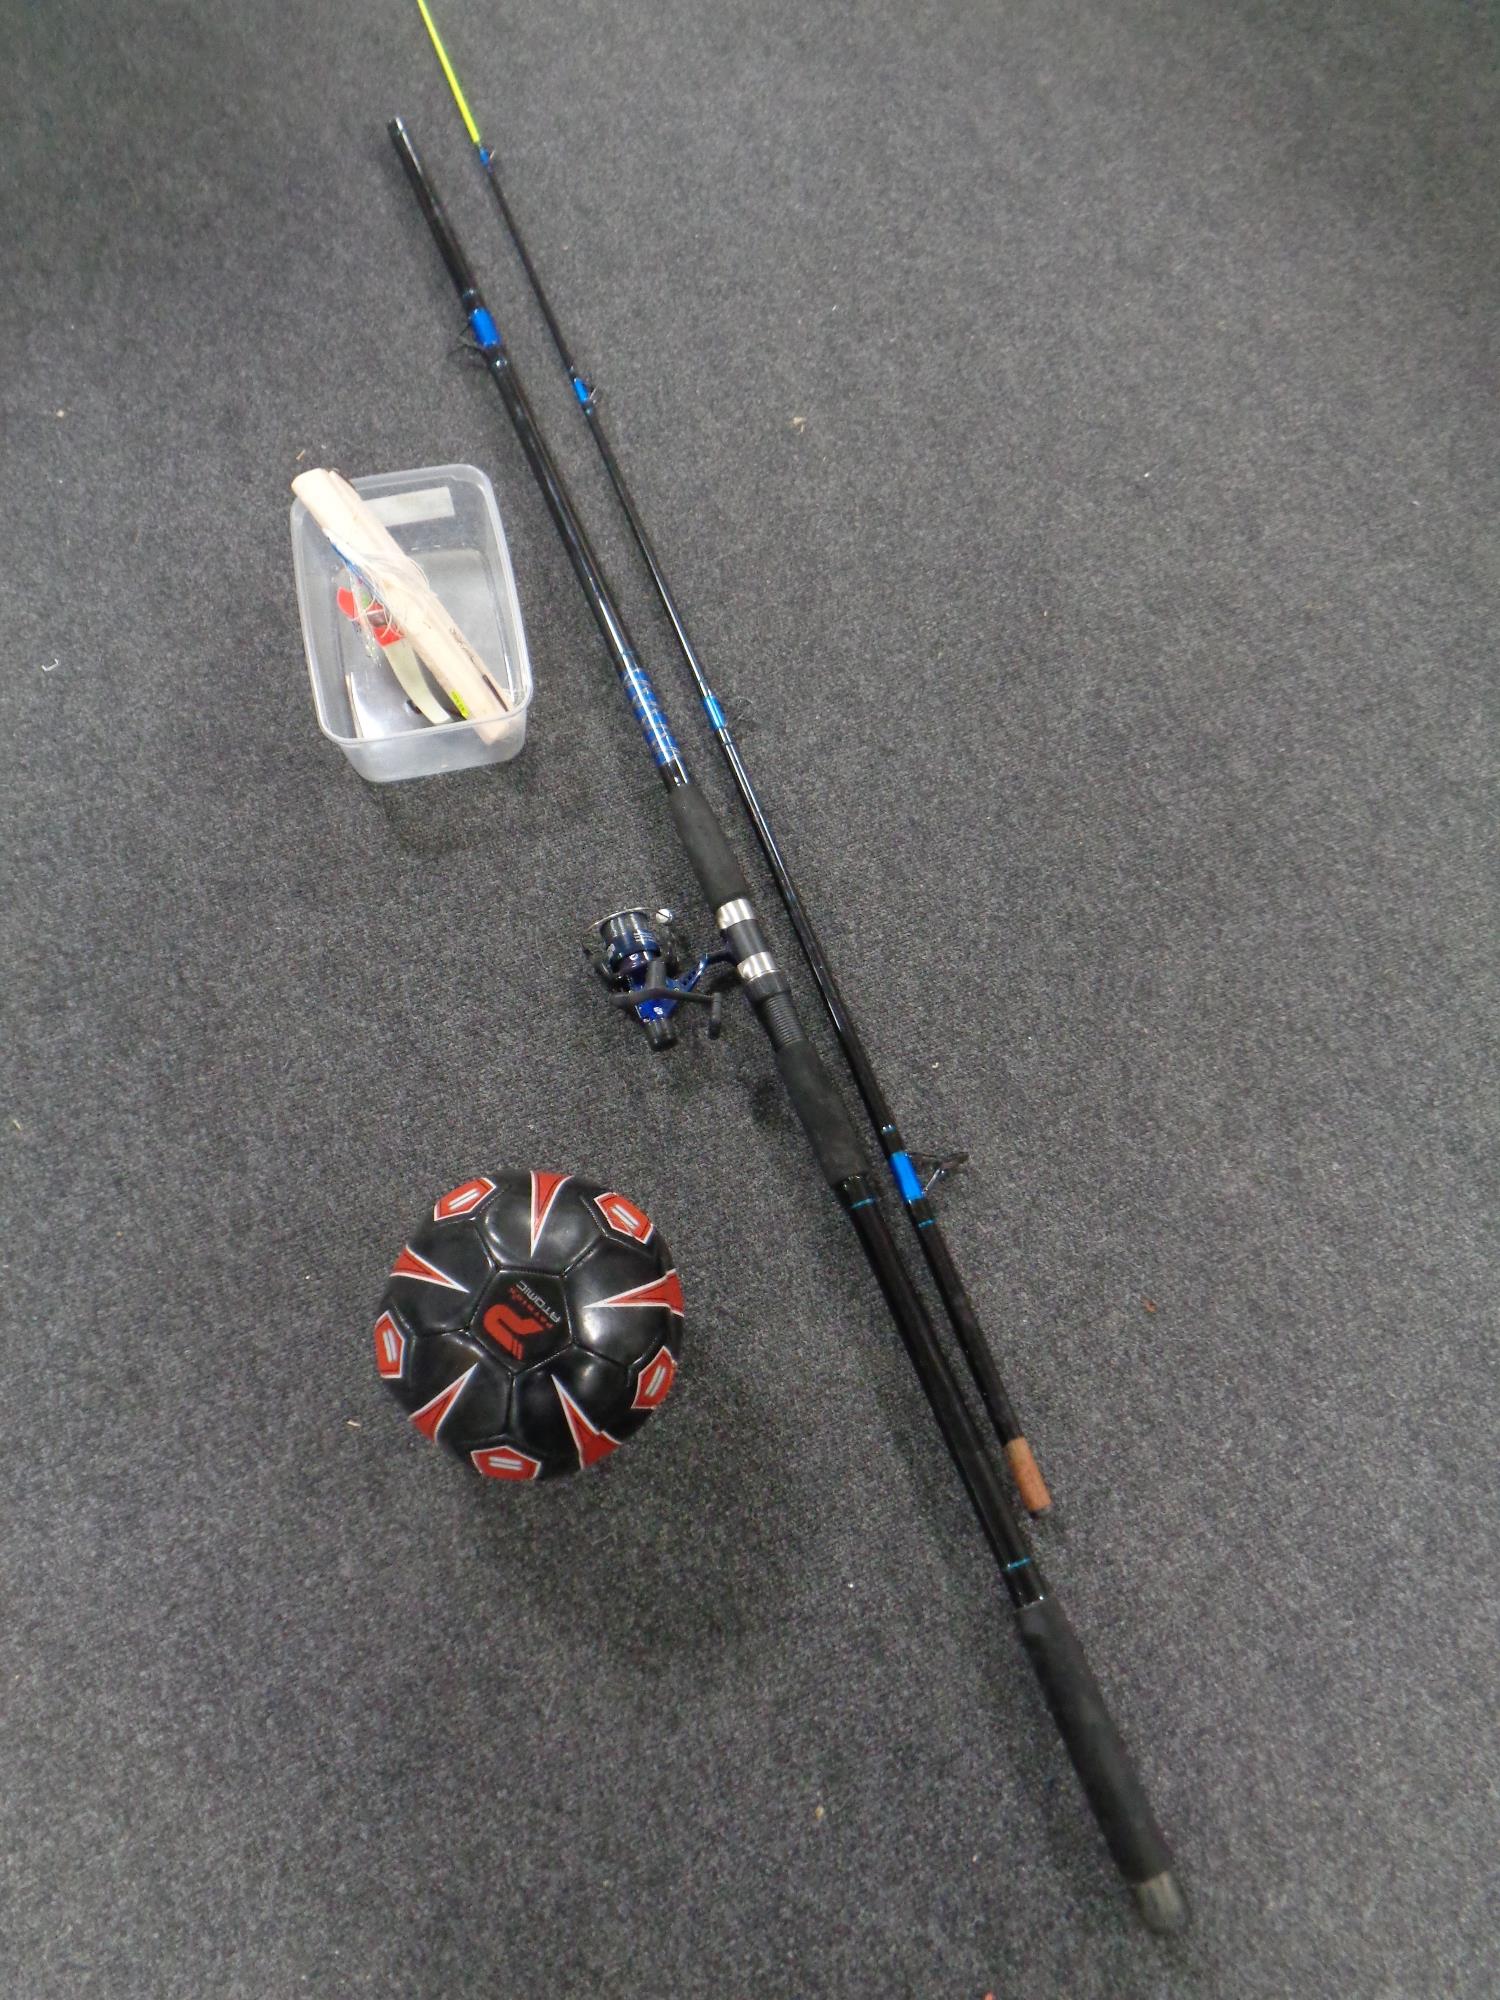 A two piece Power stick beach caster with reel and a football